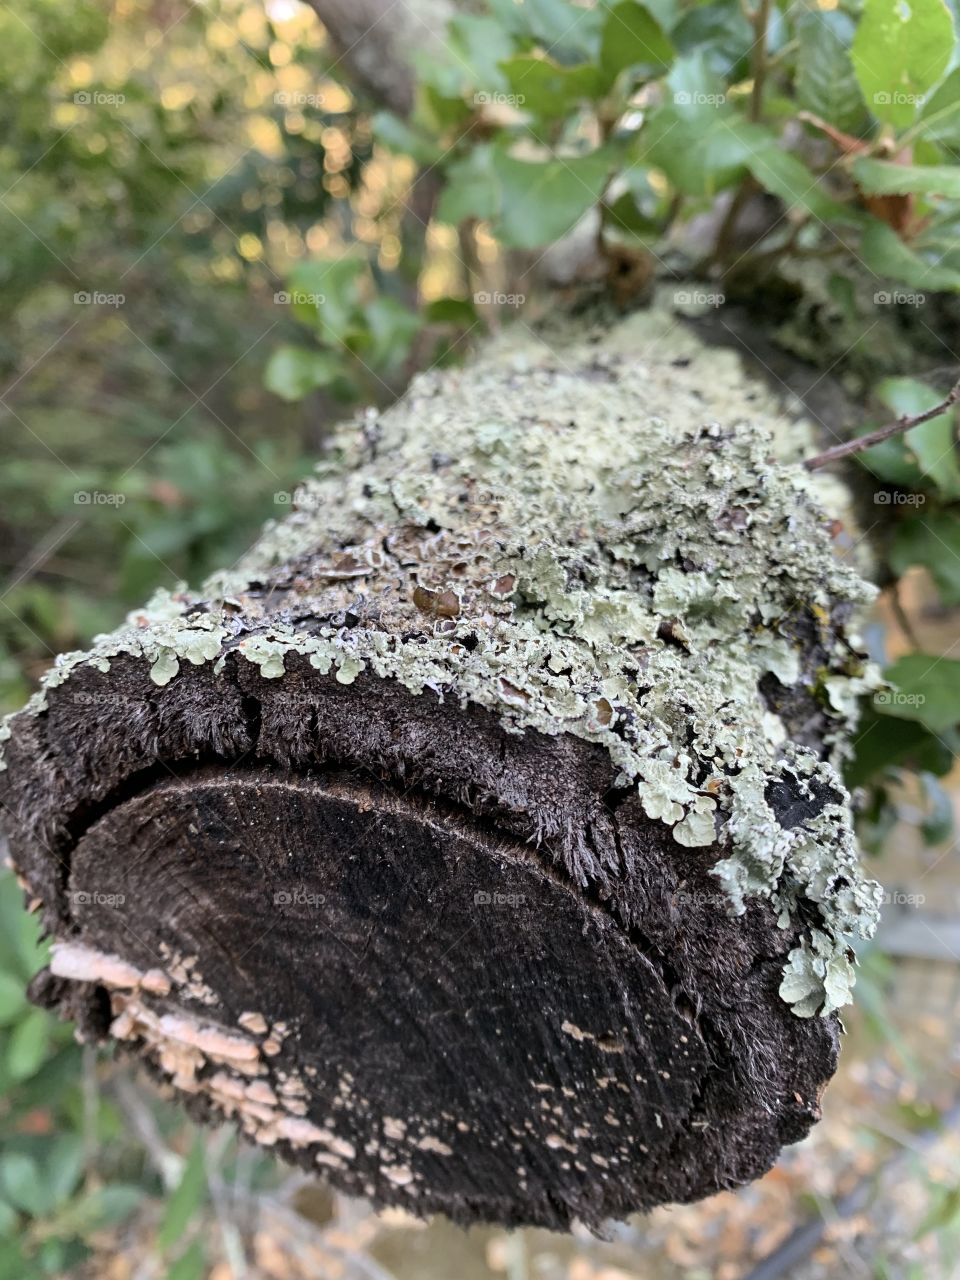 Close up of a “private log” in someone’s private park in orinda. If there could have been dust caking the outdoor playground, there would have been. Selfish 